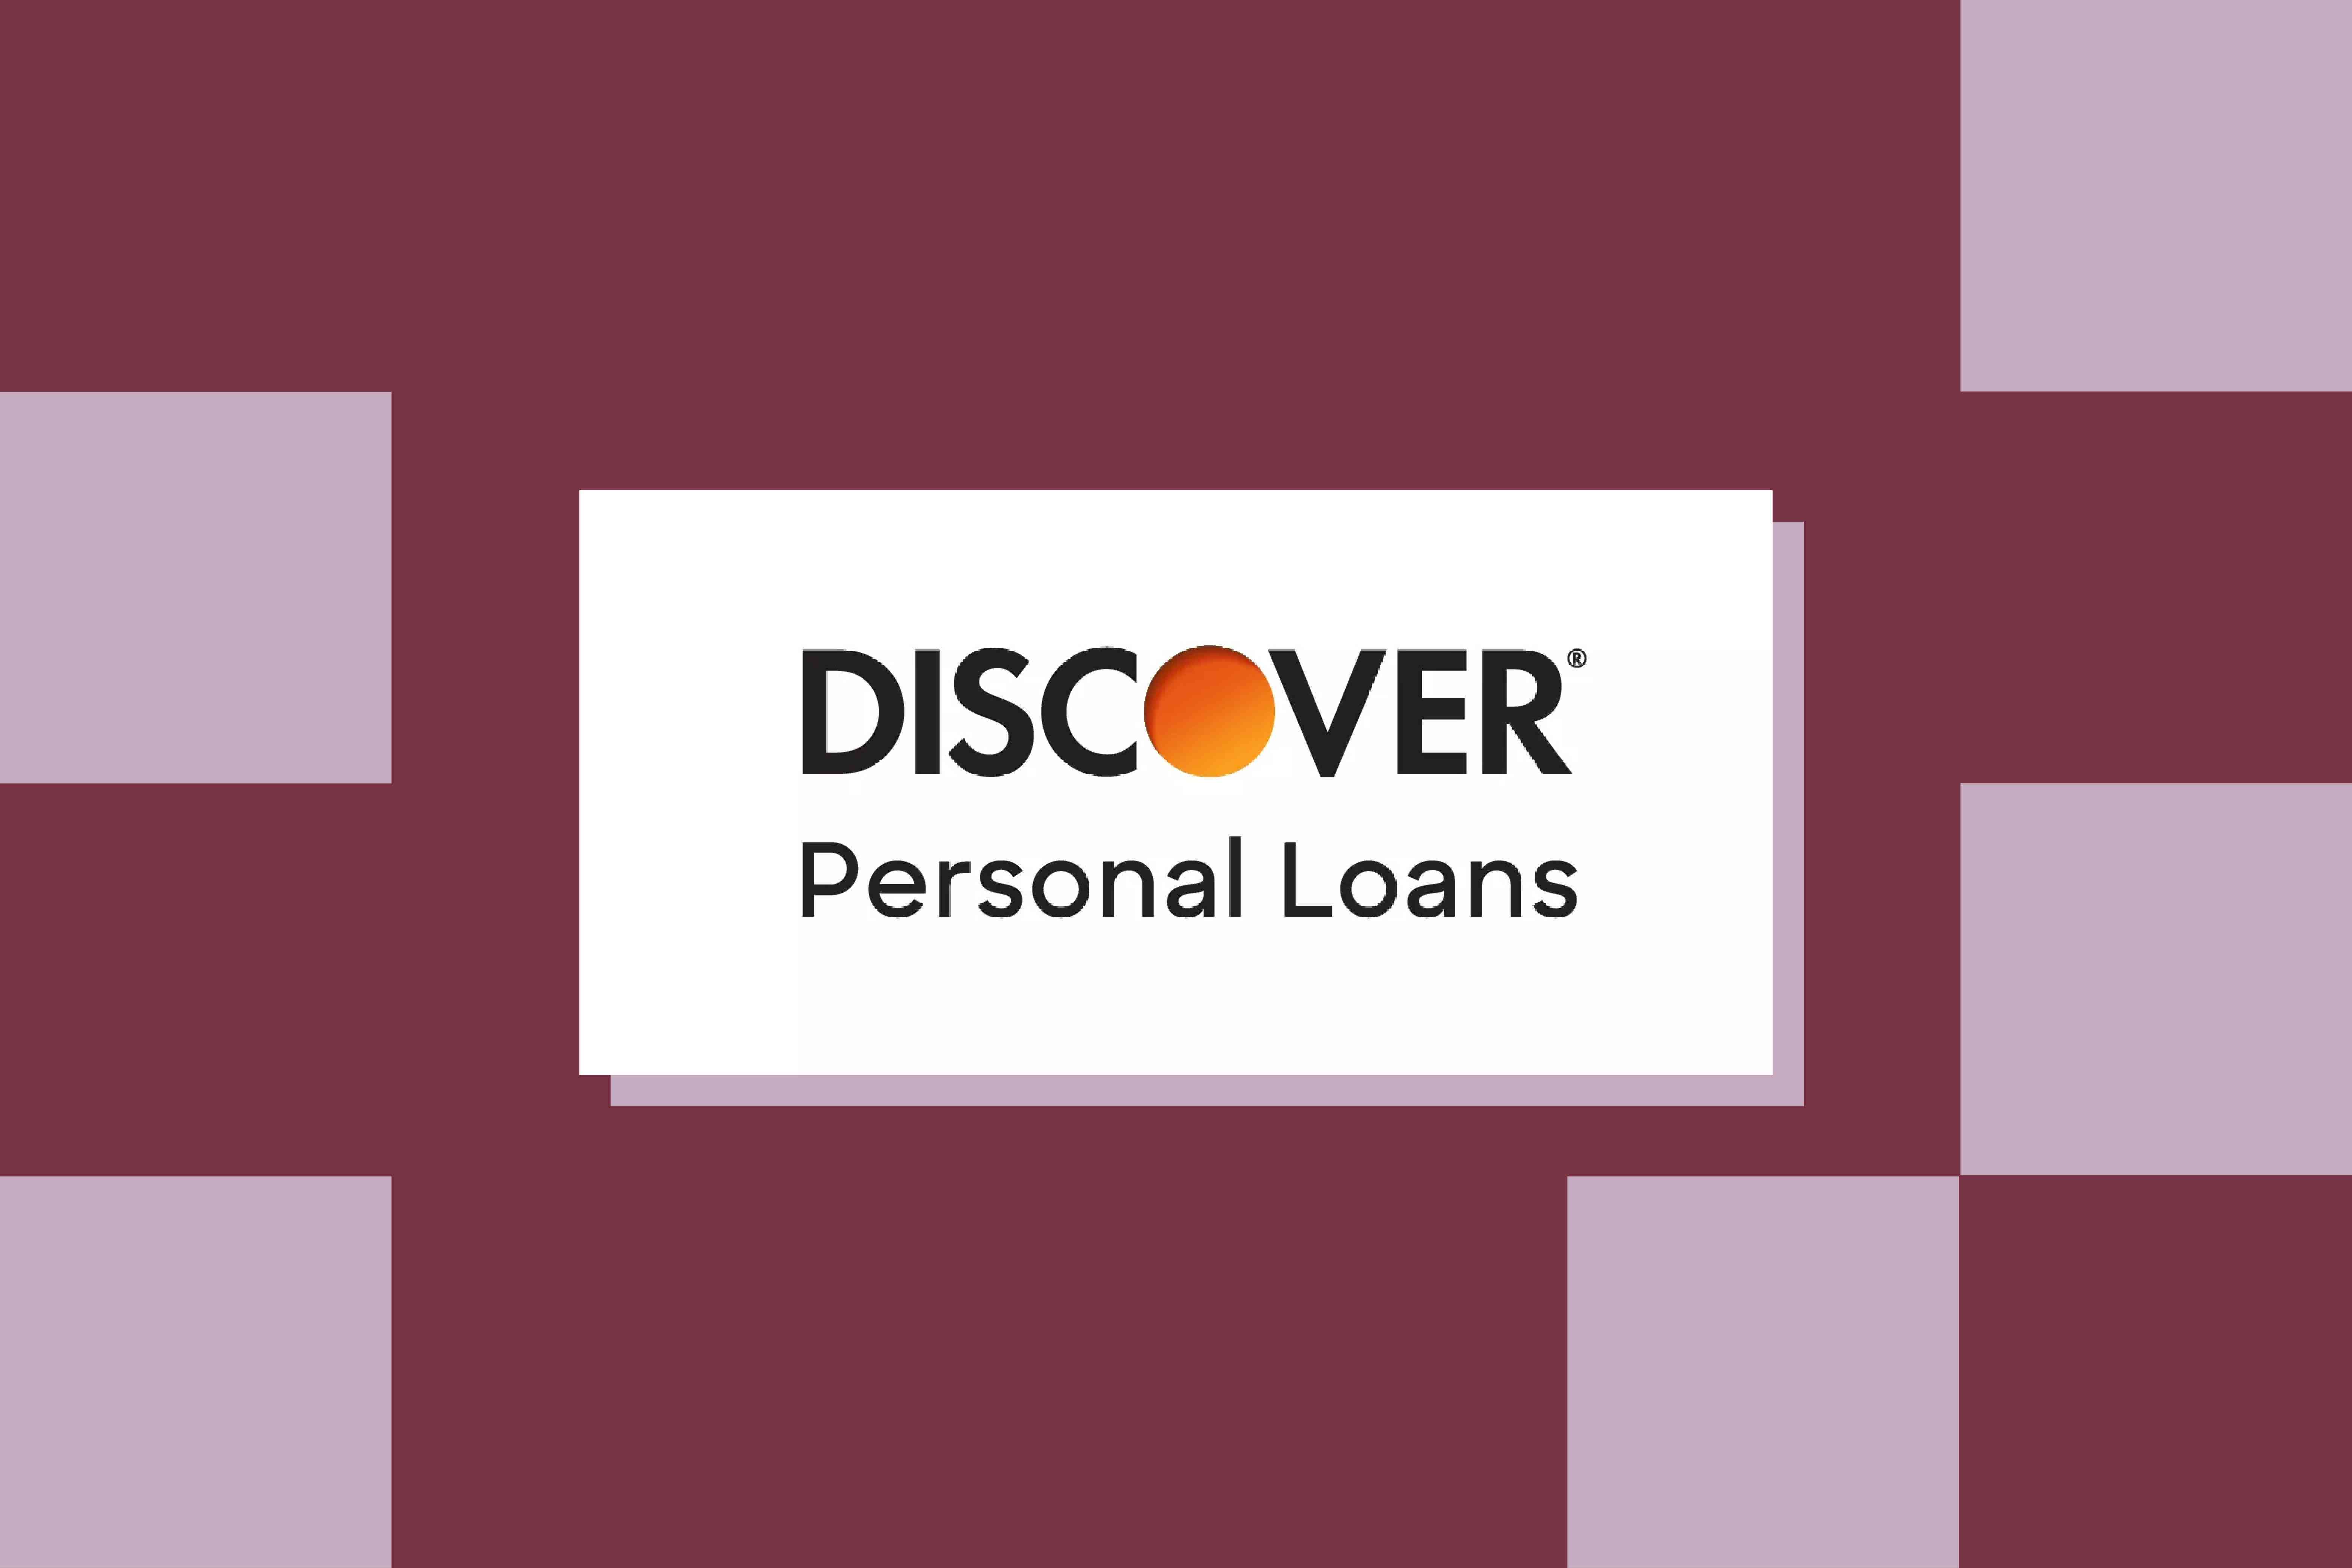 The Discover bank logo hovers lightly over a field of maroon and mauve blocks.